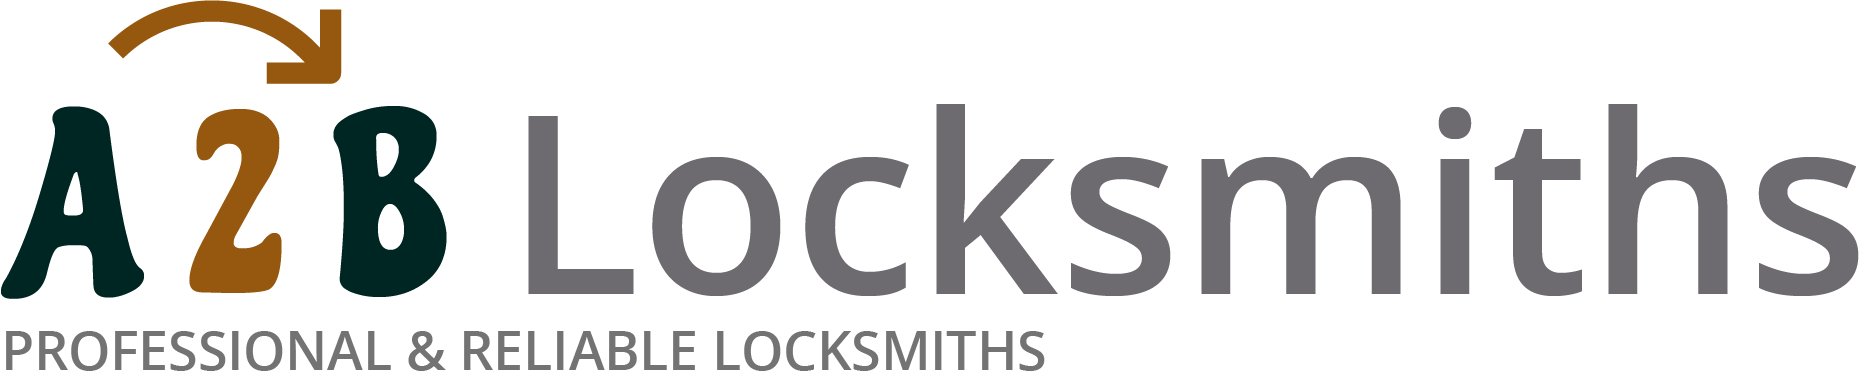 If you are locked out of house in Sunderland, our 24/7 local emergency locksmith services can help you.